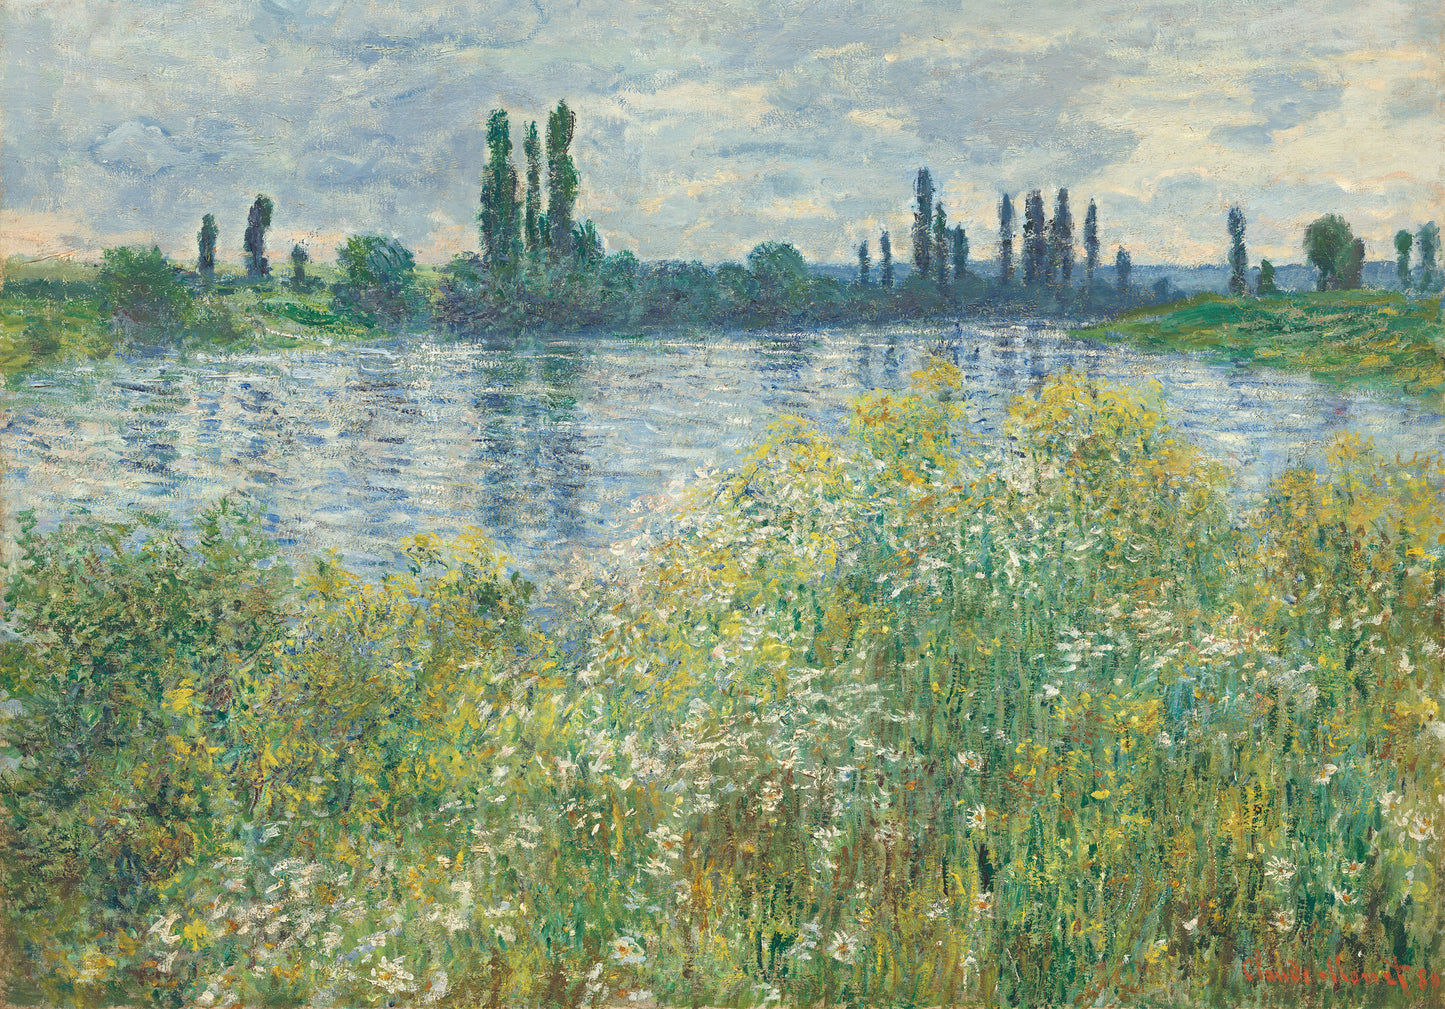 Banks of the Seine, Vétheuil, 1880